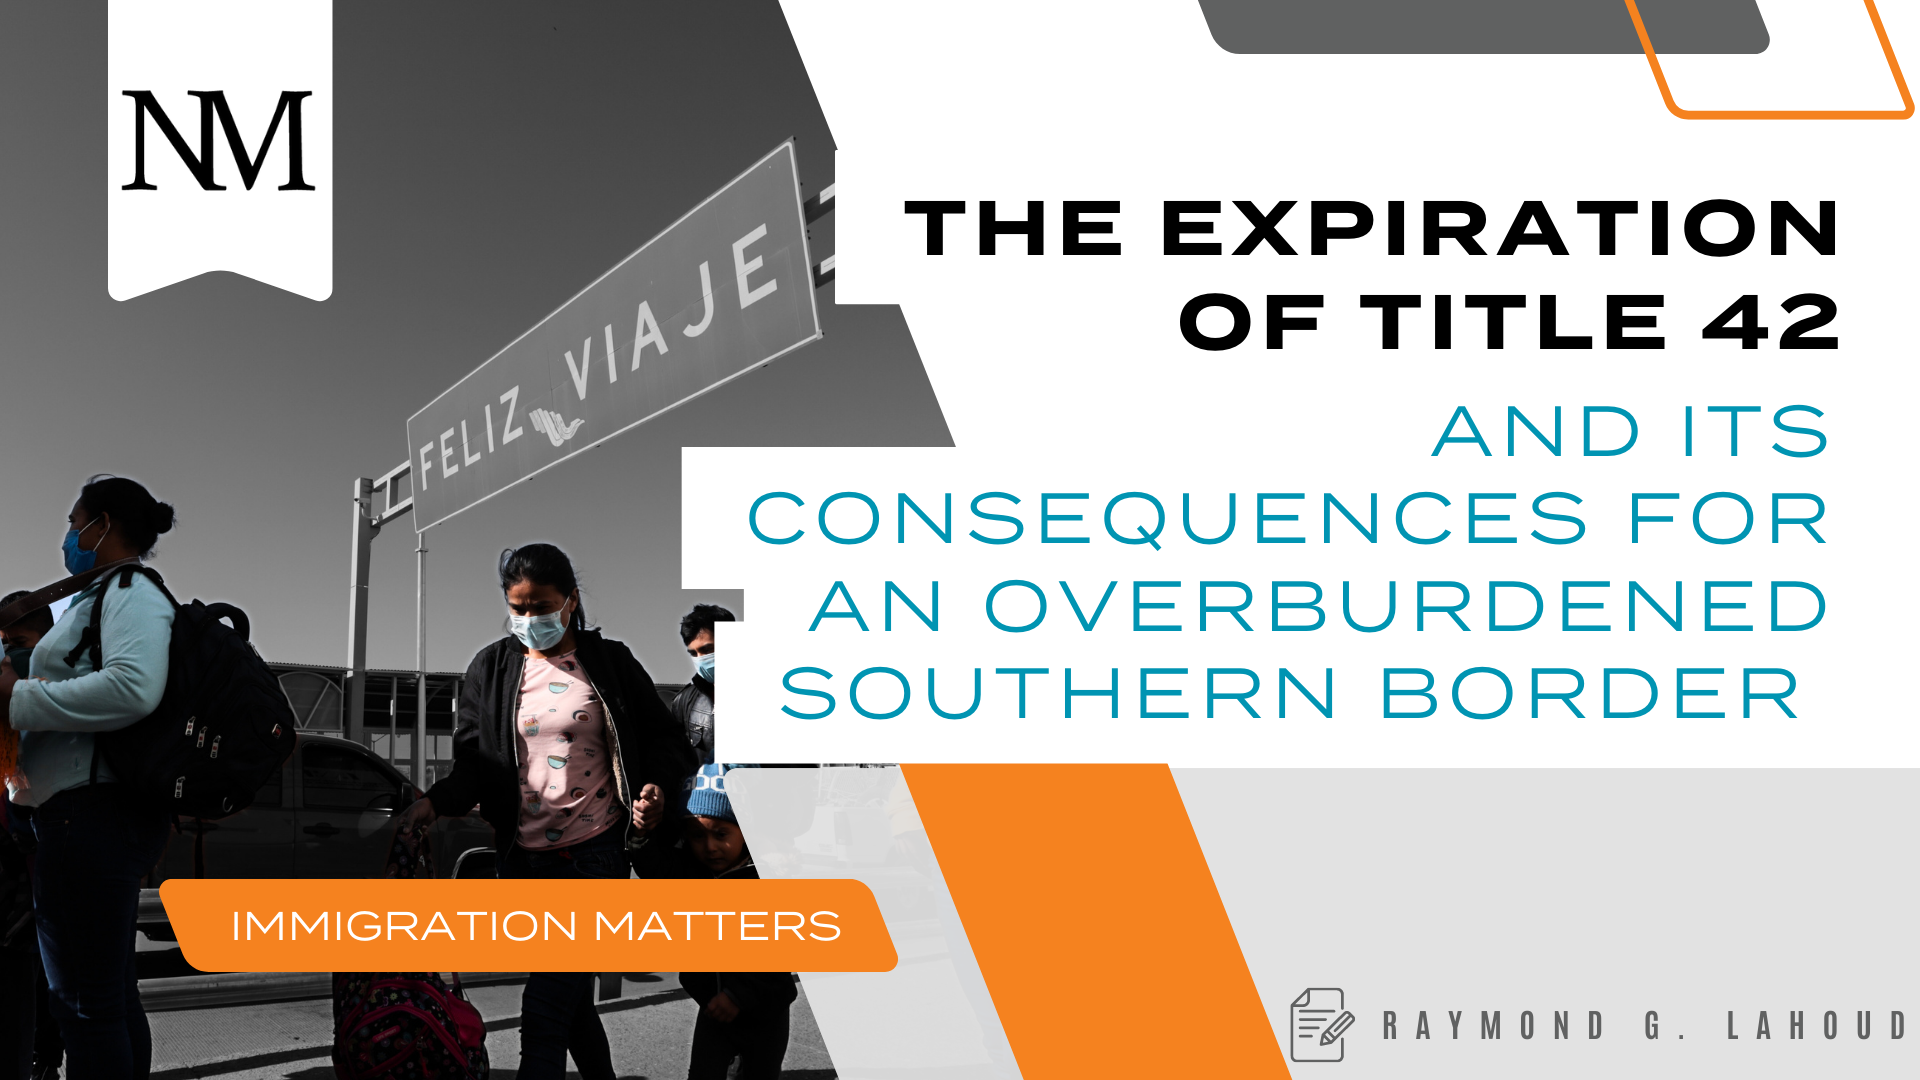 The Expiration of Title 42 and its Consequences for an Overburdened Southern Border